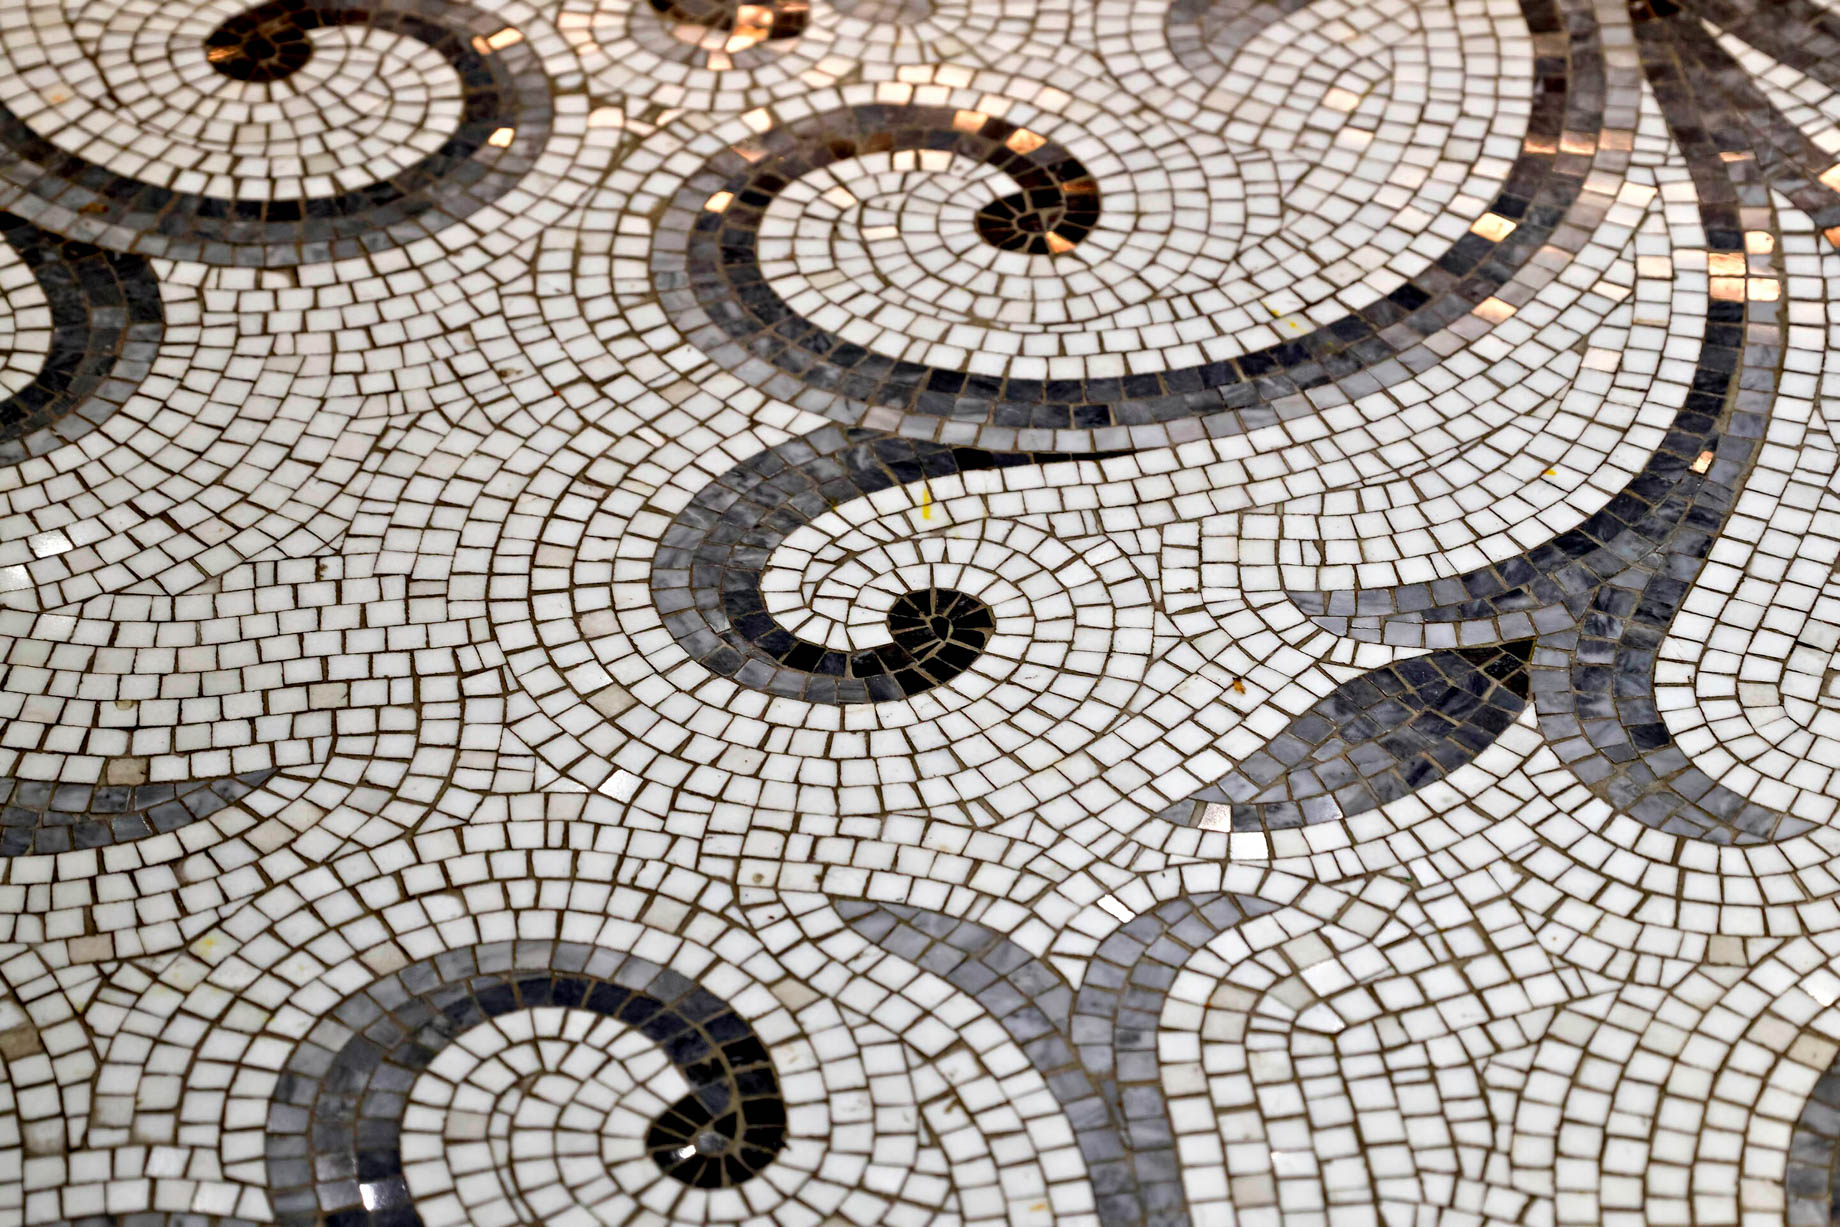 The St. Regis Rome Hotel – Rome, Italy – Mosaic Detail